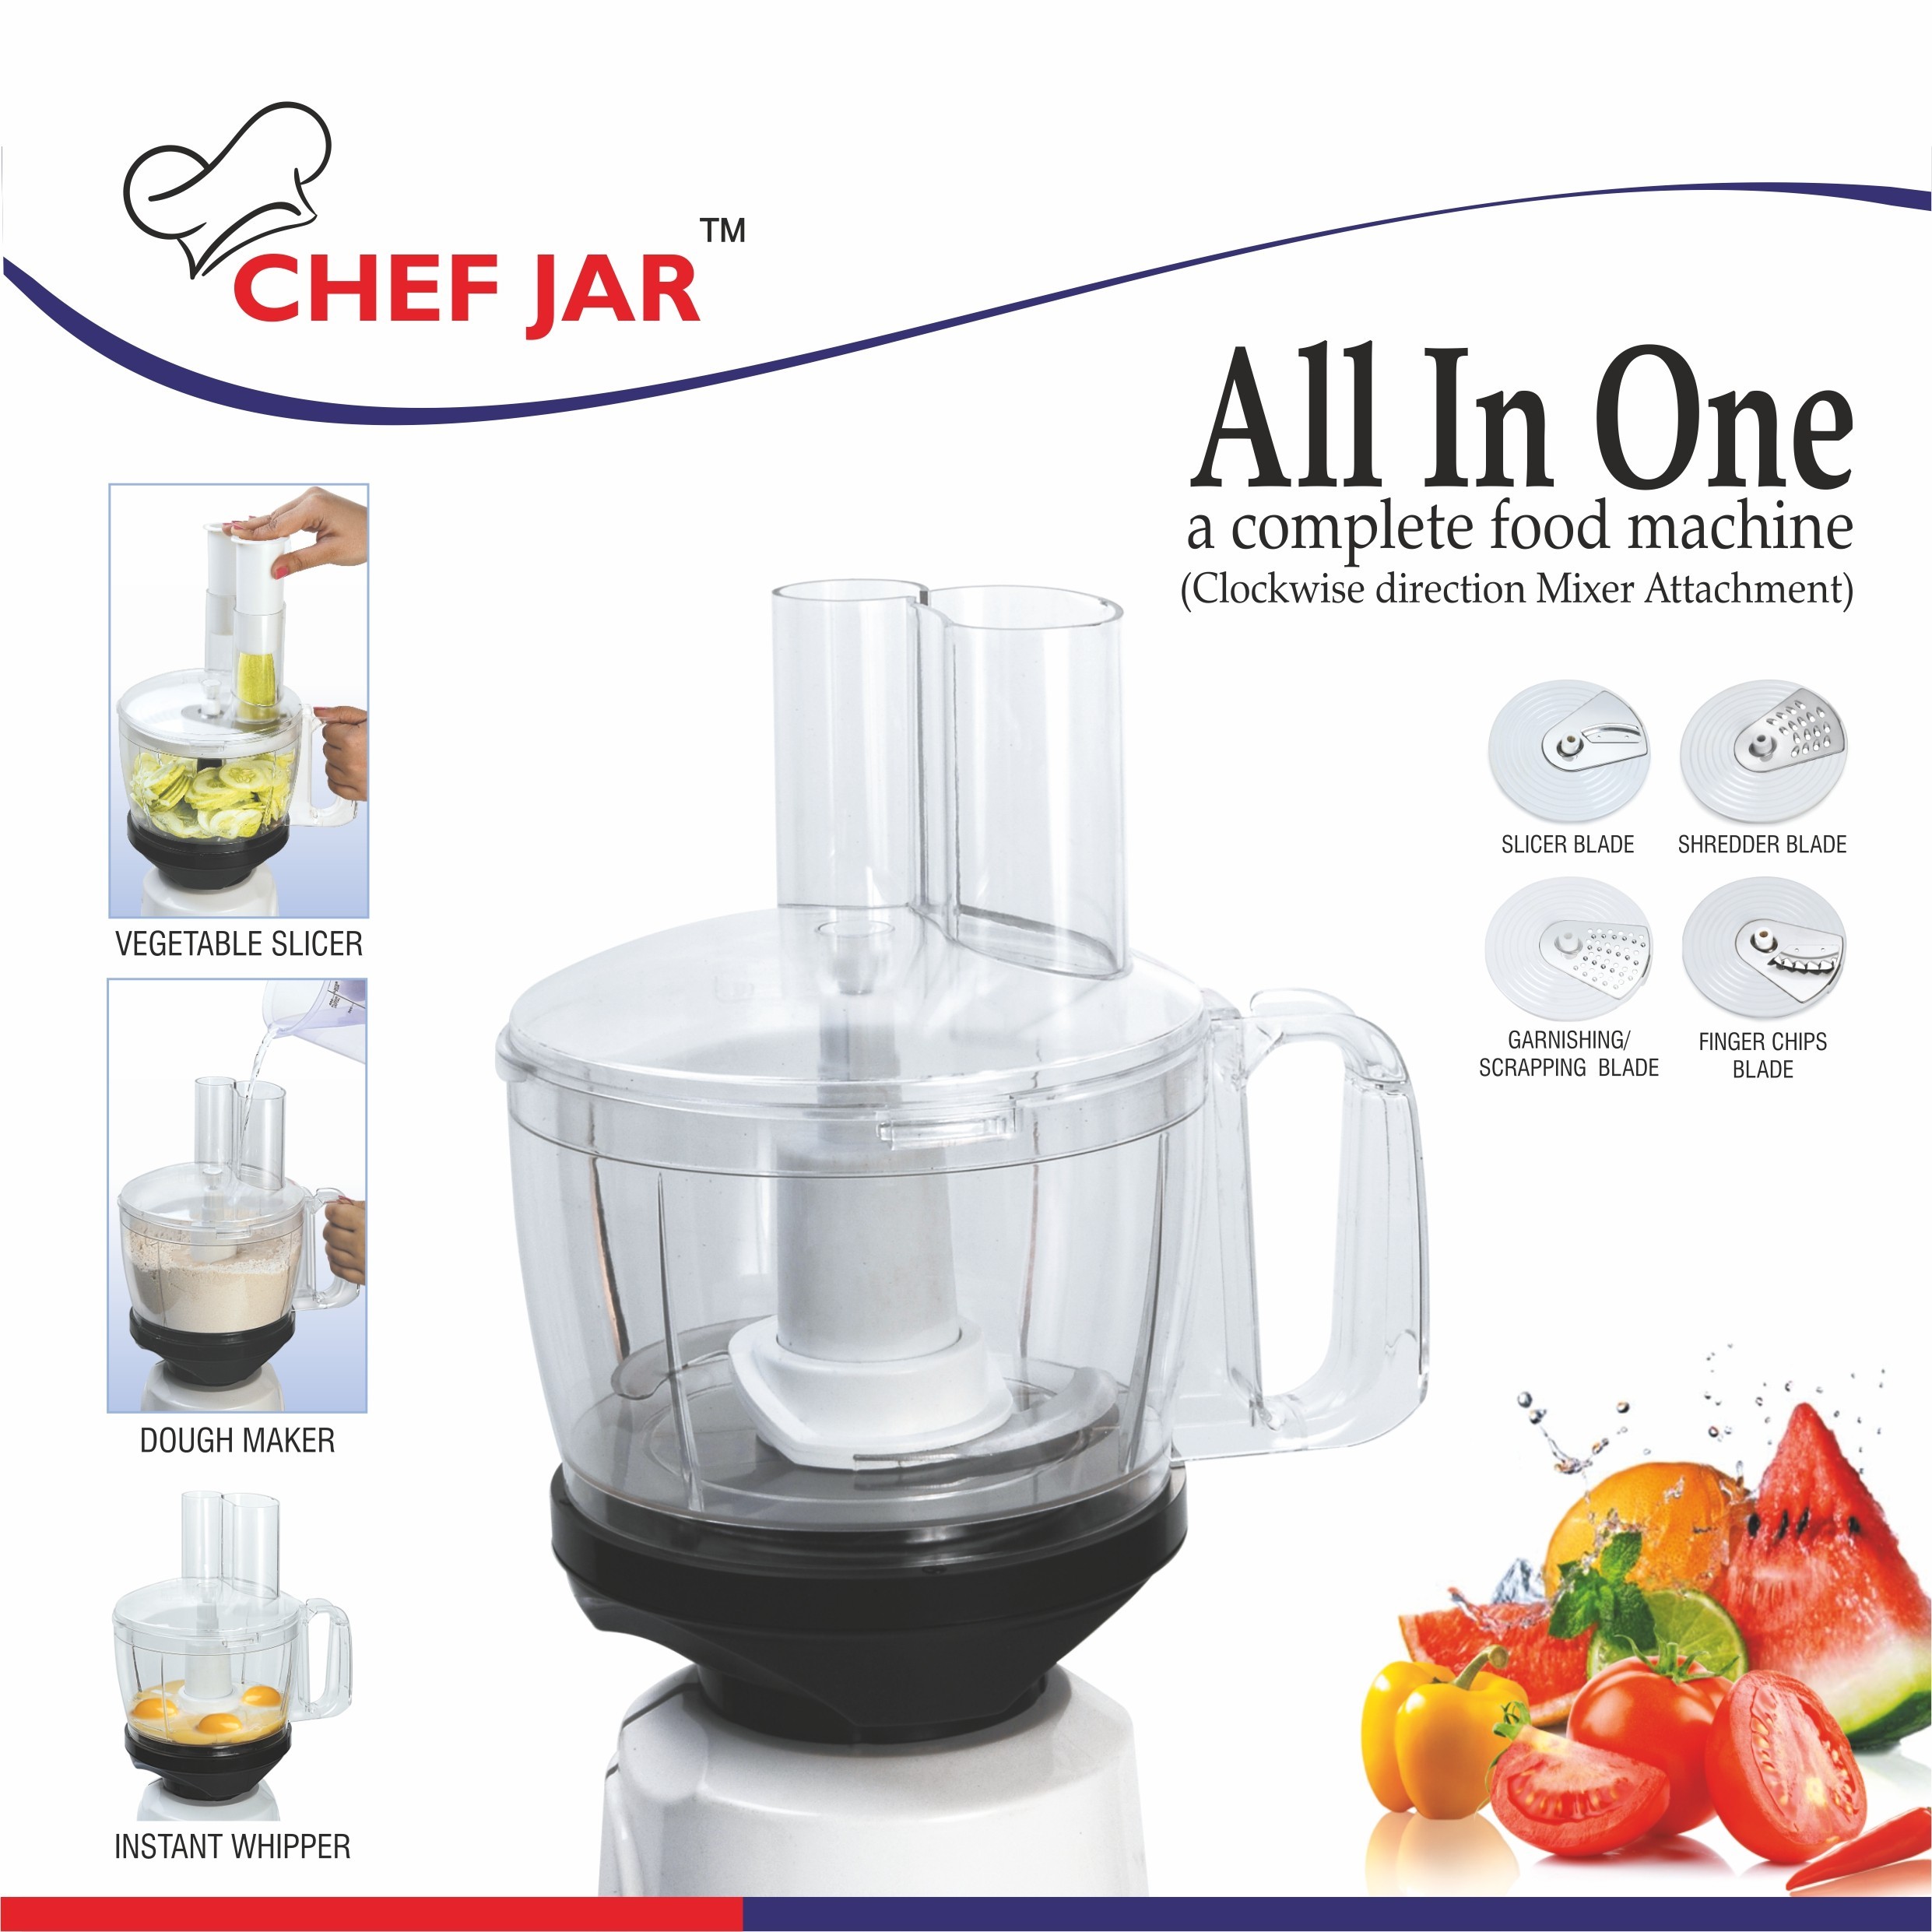 bajaj-classic-pro-600w-indian-mixer-grinder-with-special-chef-jar-stainless-steel-jars-indian-mixer-grinder-spice-coffee-grinder-110v-for-use-in-canada-usa7